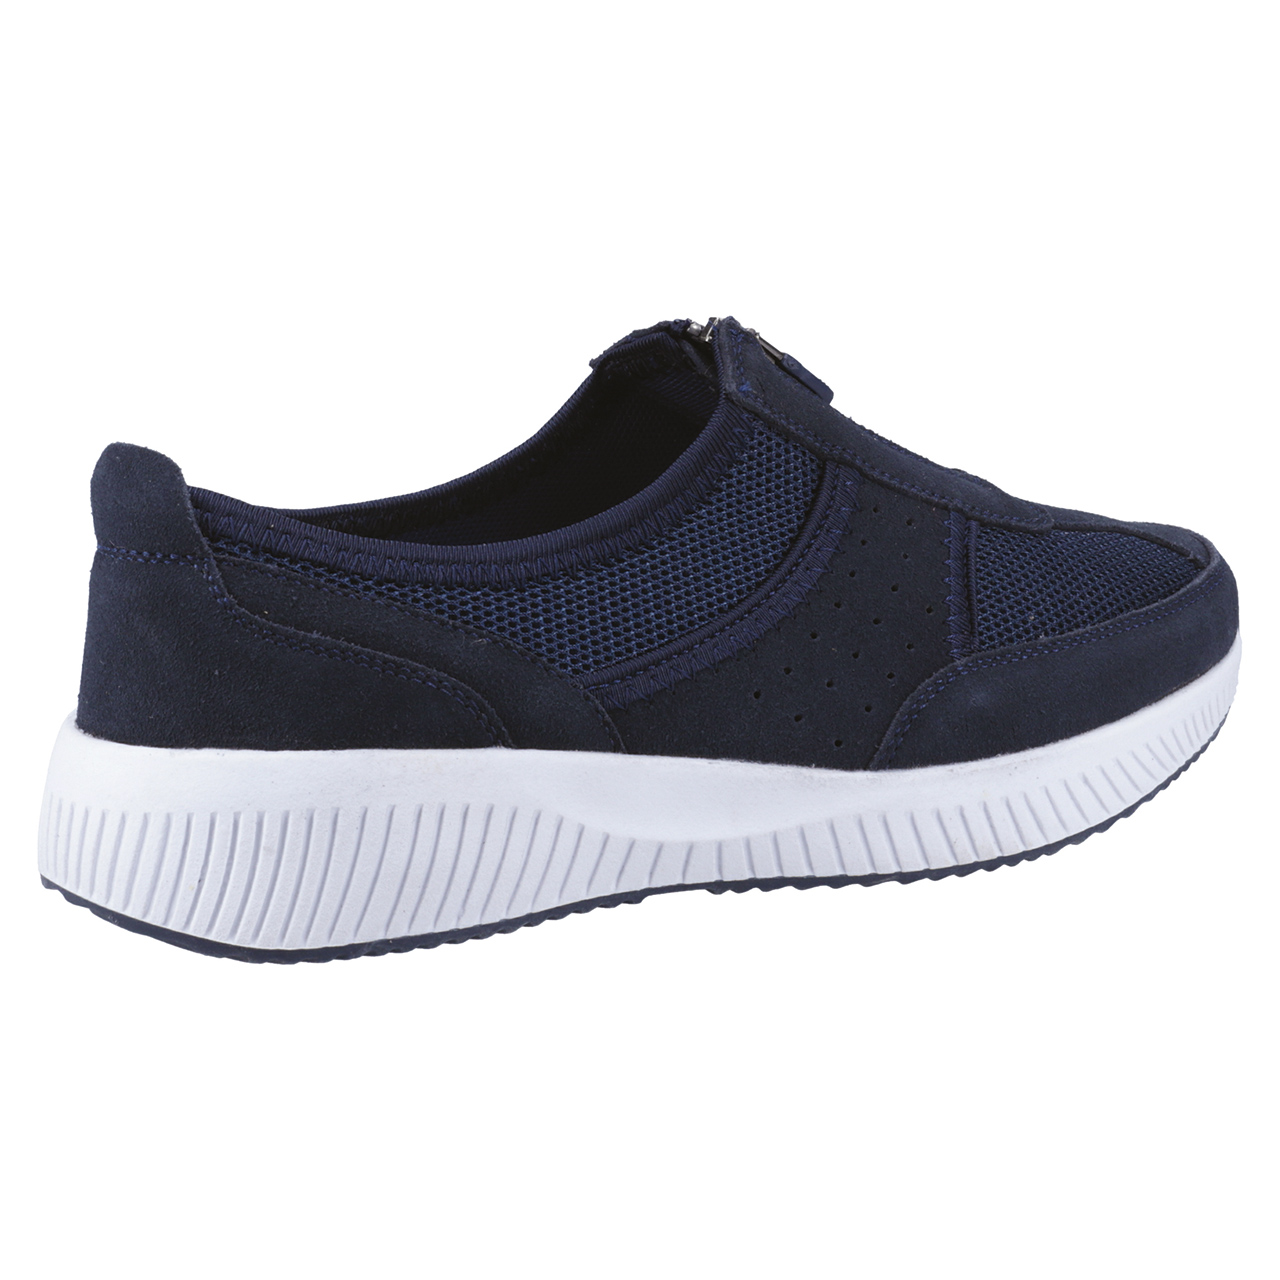 Cora Extra Wide Ladies? Leisure Shoes